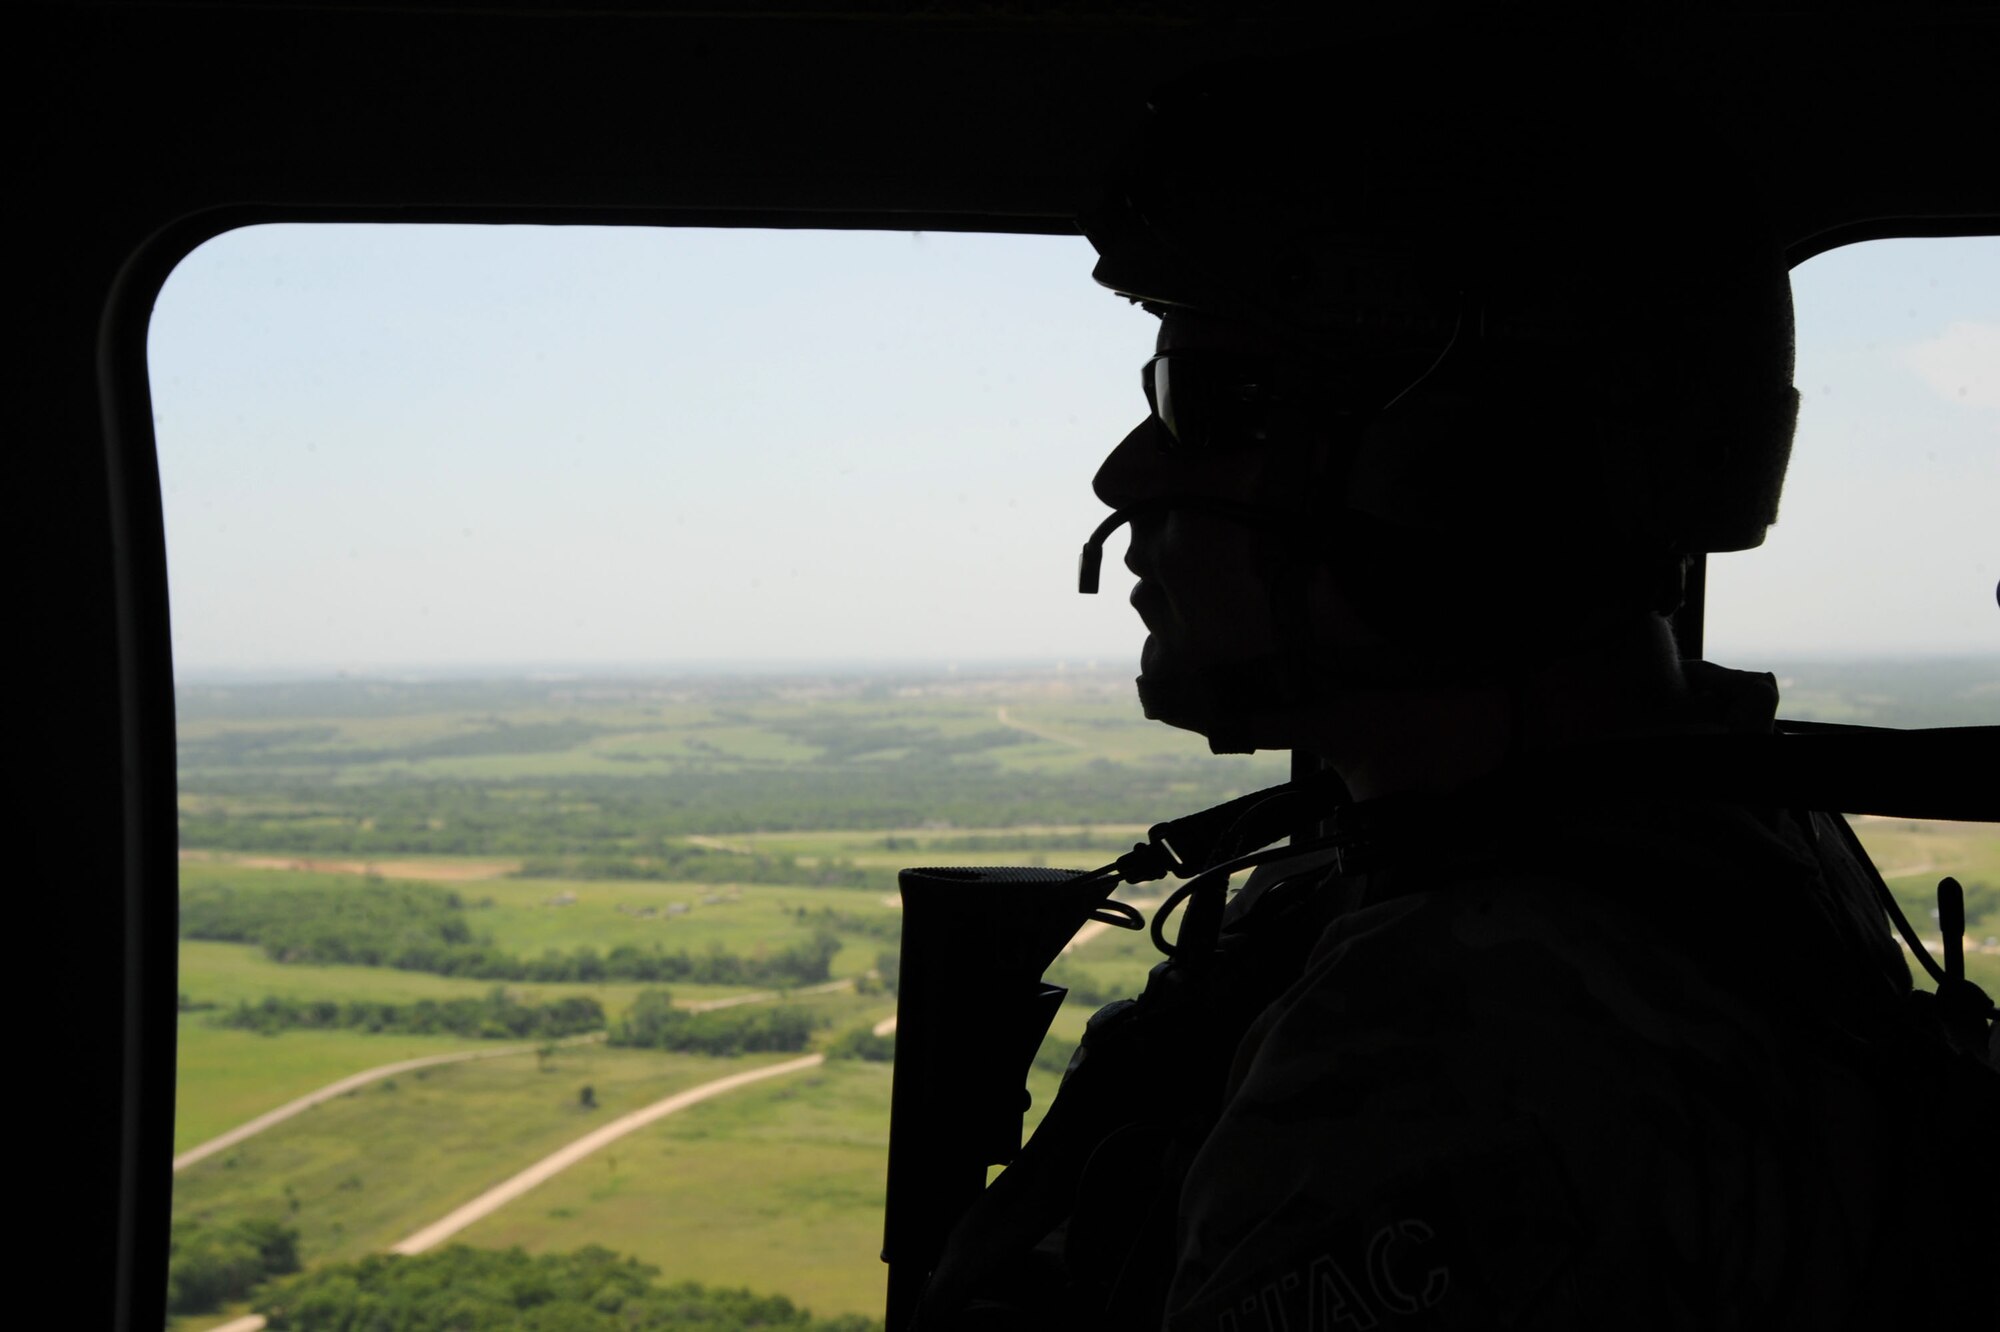 A 10th Air Support Operations Squadron joint terminal attack control Airman rides in a UH-60 Blackhawk during a joint operations aircrew recovery exercise, June 22, 2016, at Fort Riley, Kan. JTAC Airmen train regularly for their responsibilities of calling in close air support to maintain mission readiness. (U.S. Air Force photo/Airman 1st Class Jenna K. Caldwell)